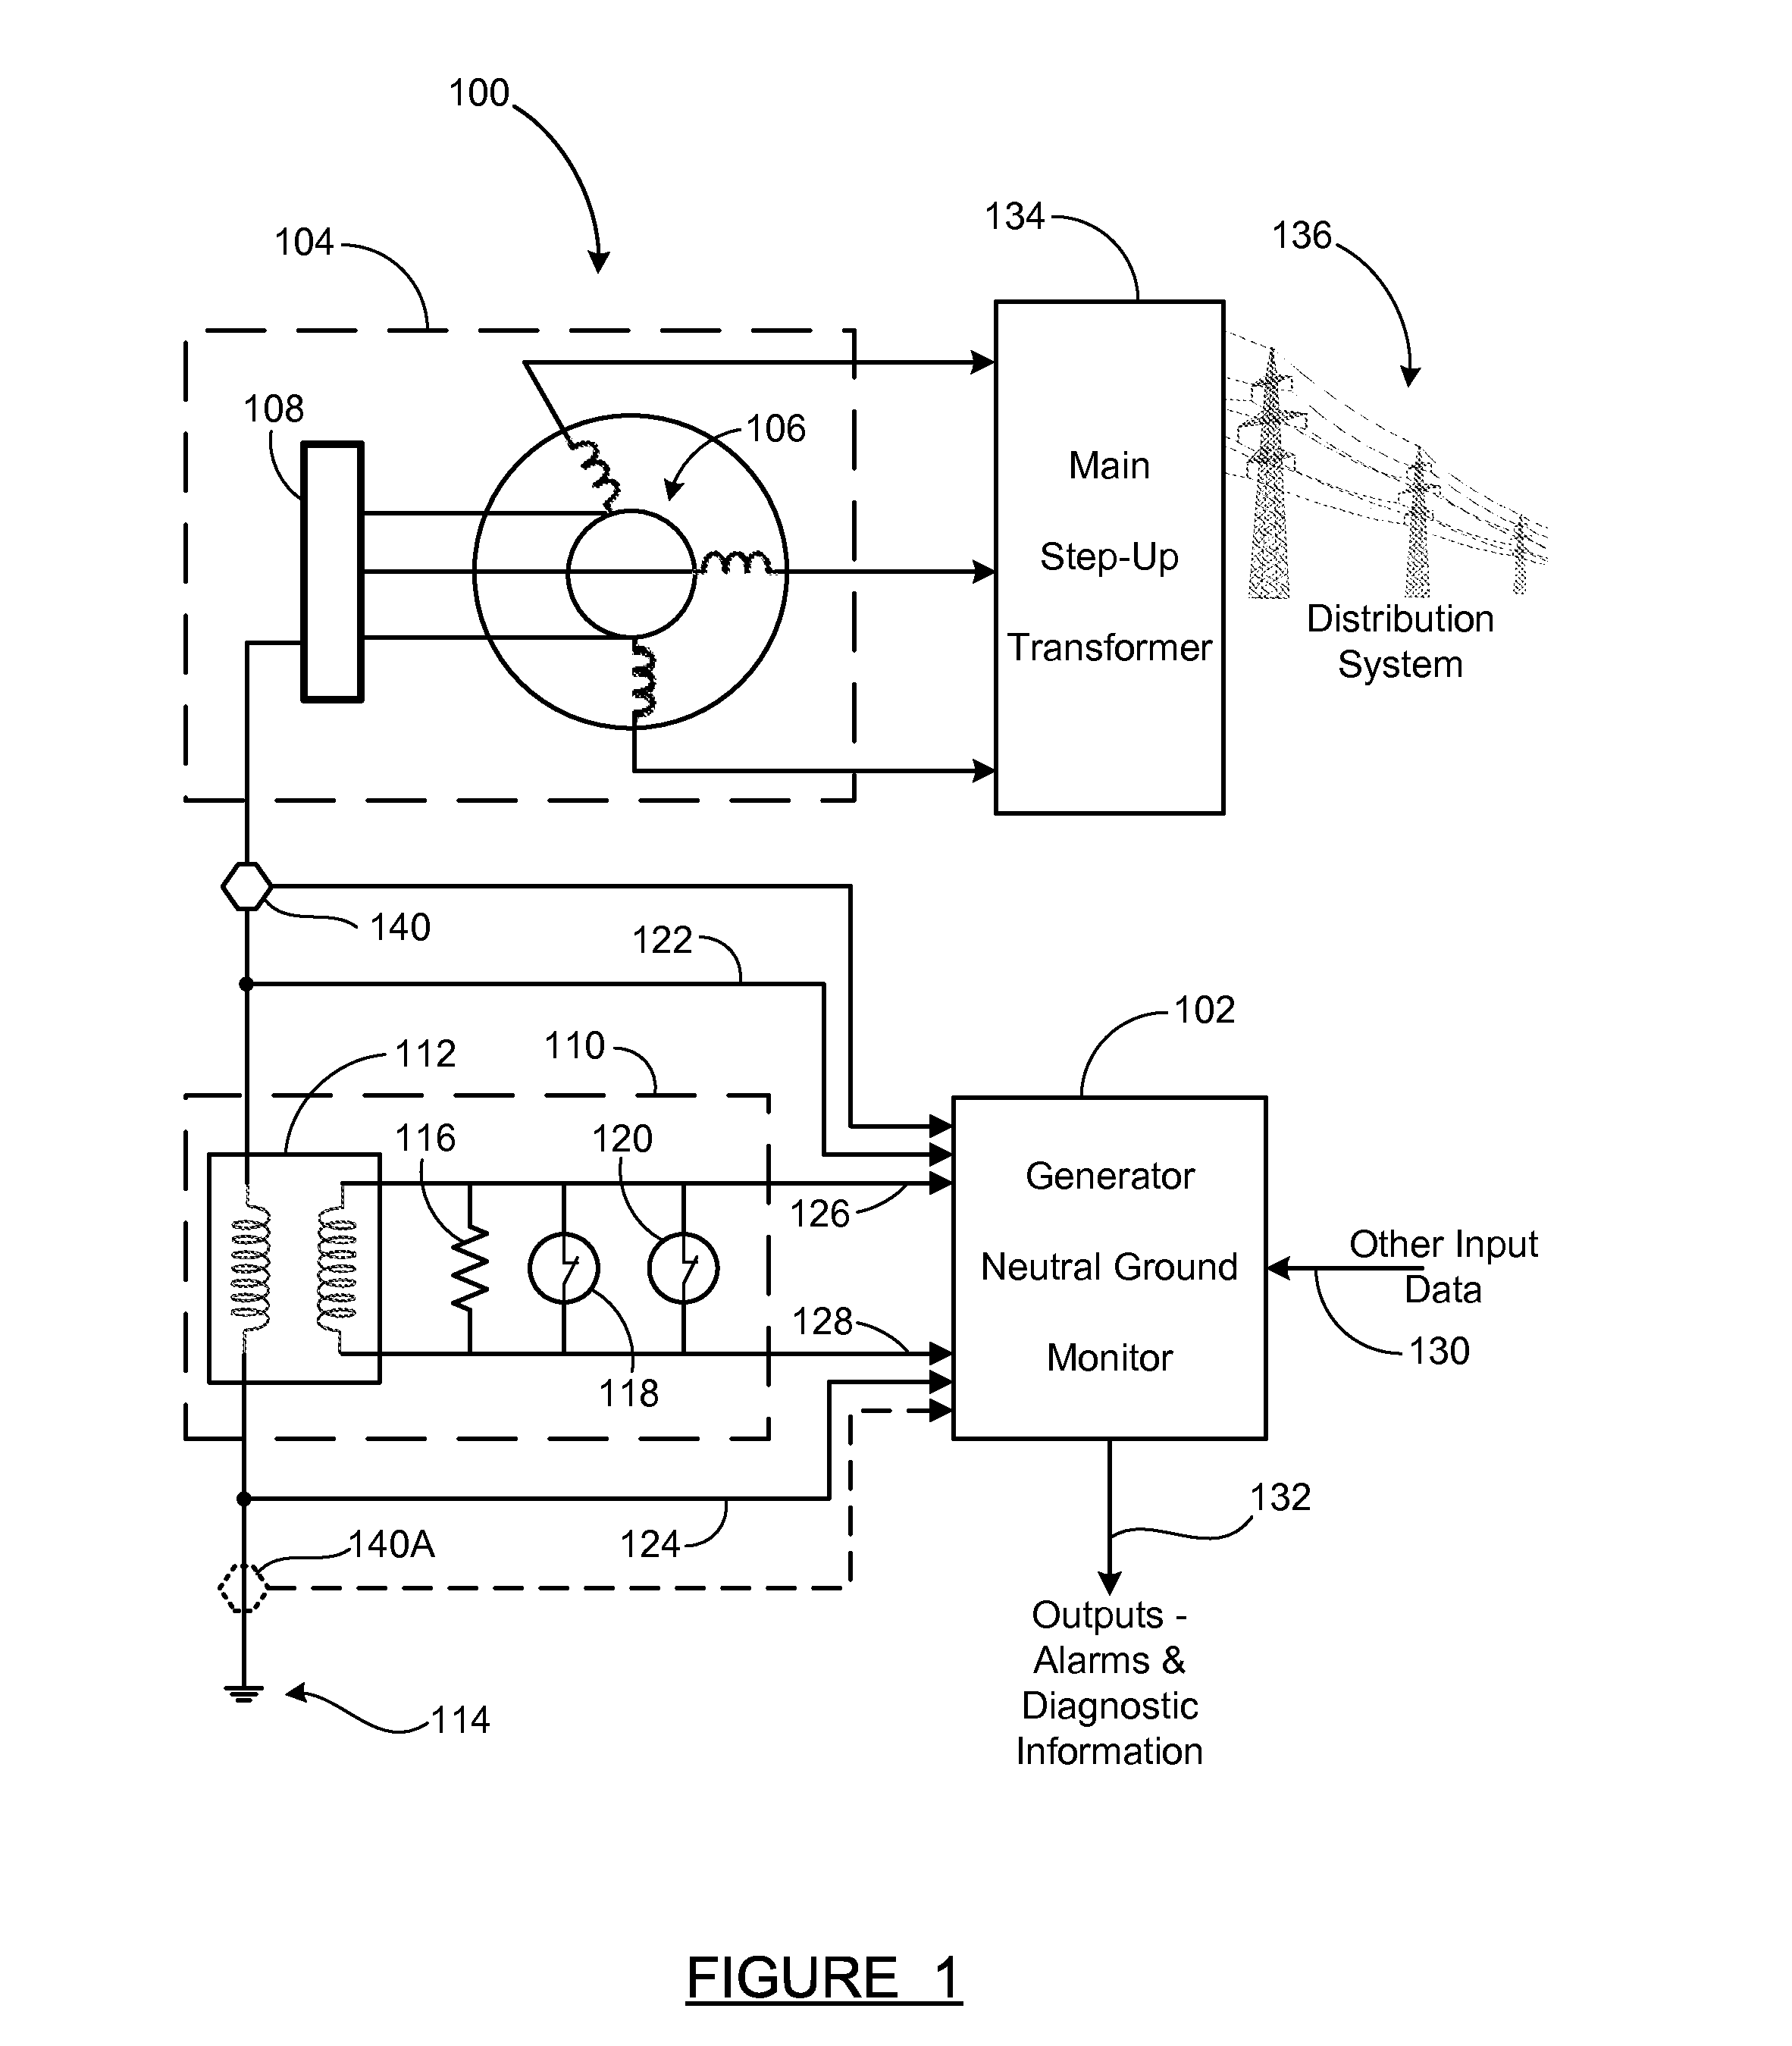 Generator neutral ground monitoring device utilizing direct current component measurement and analysis